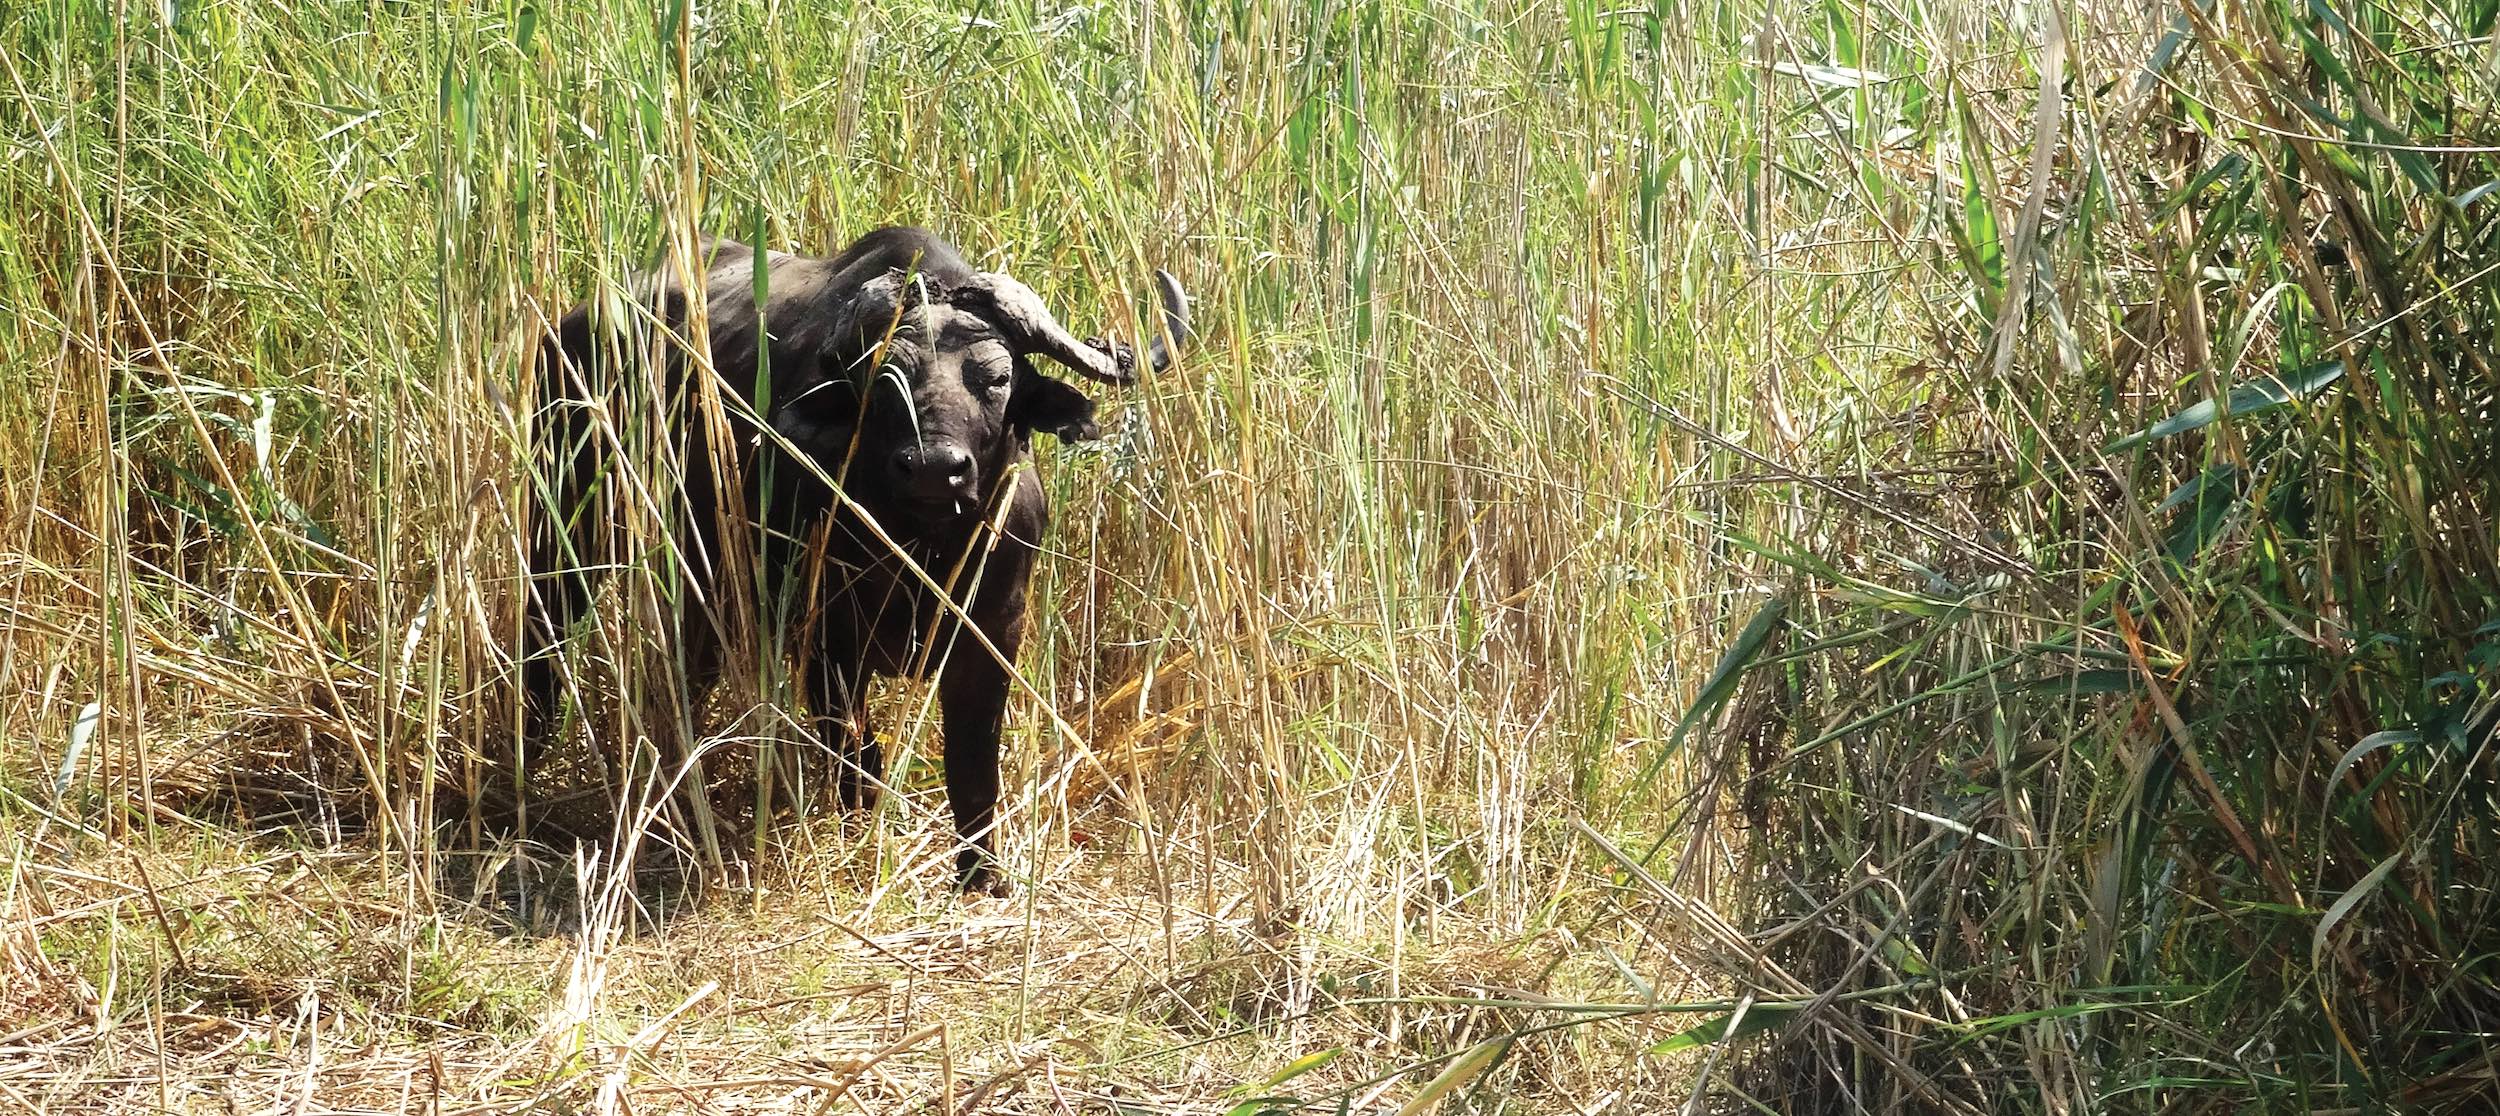 A large buffalo gazes out from concealment in thick reeds.